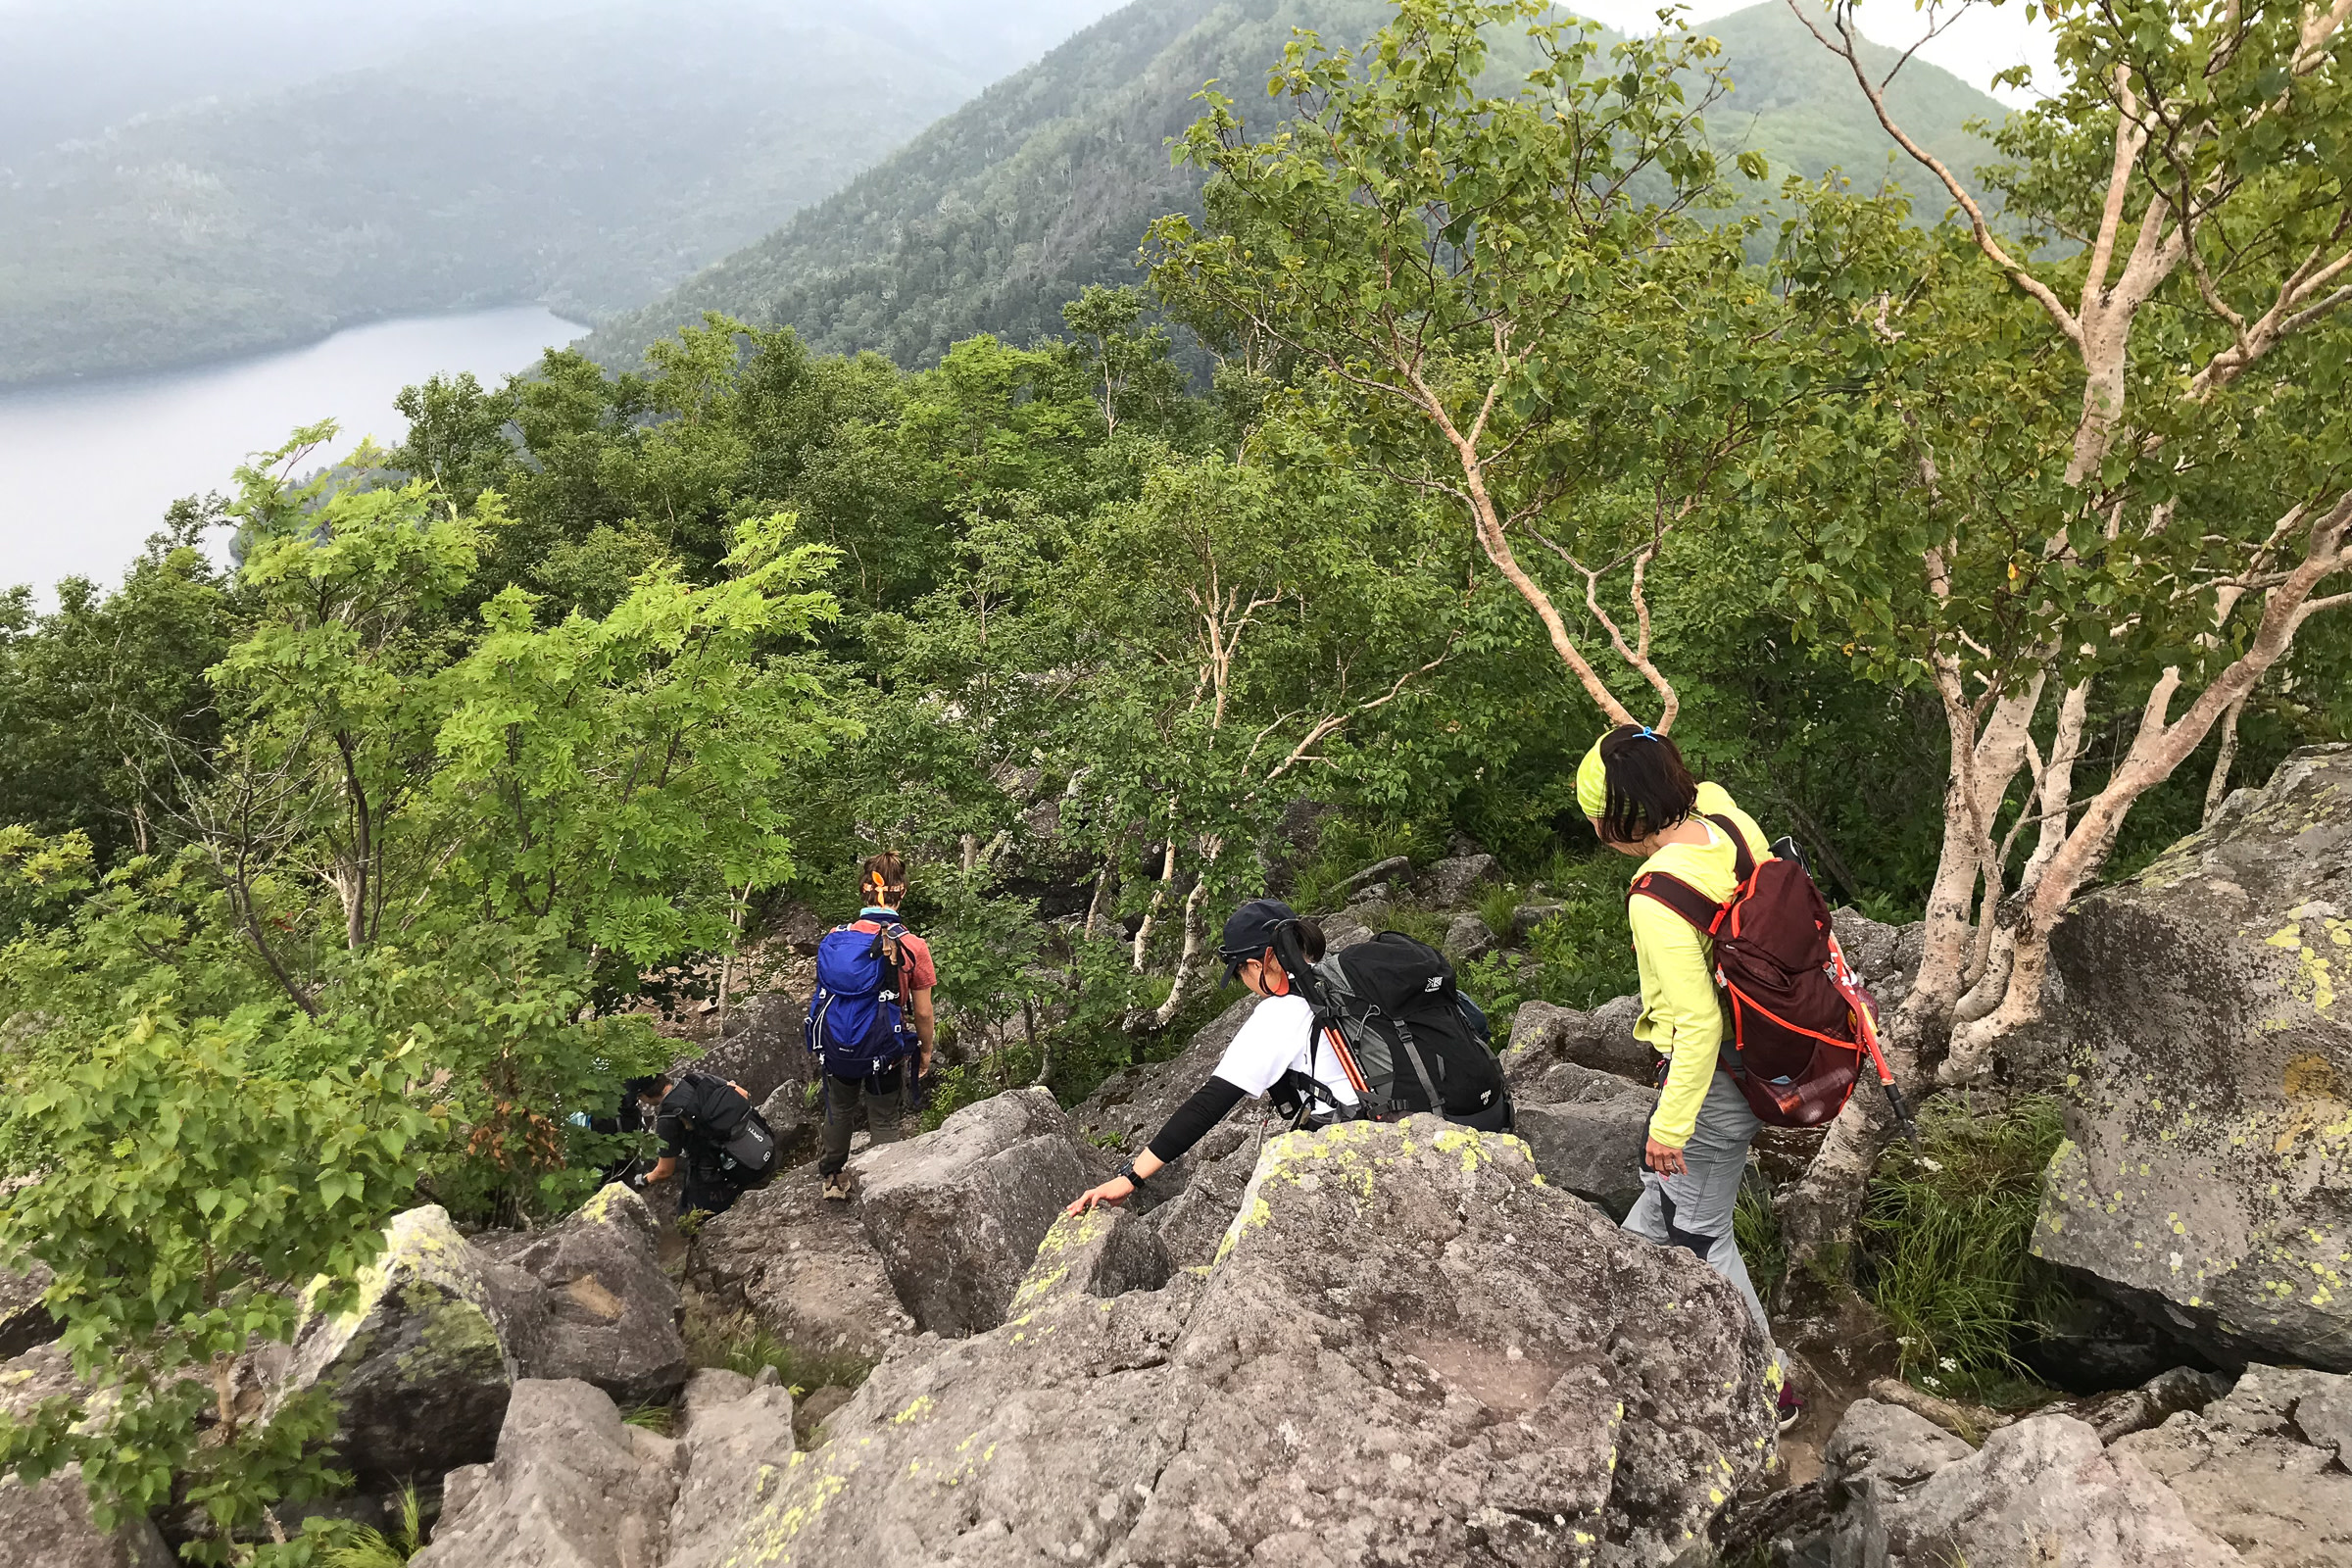 Four hikers descend a mountain slope covered in boulders.